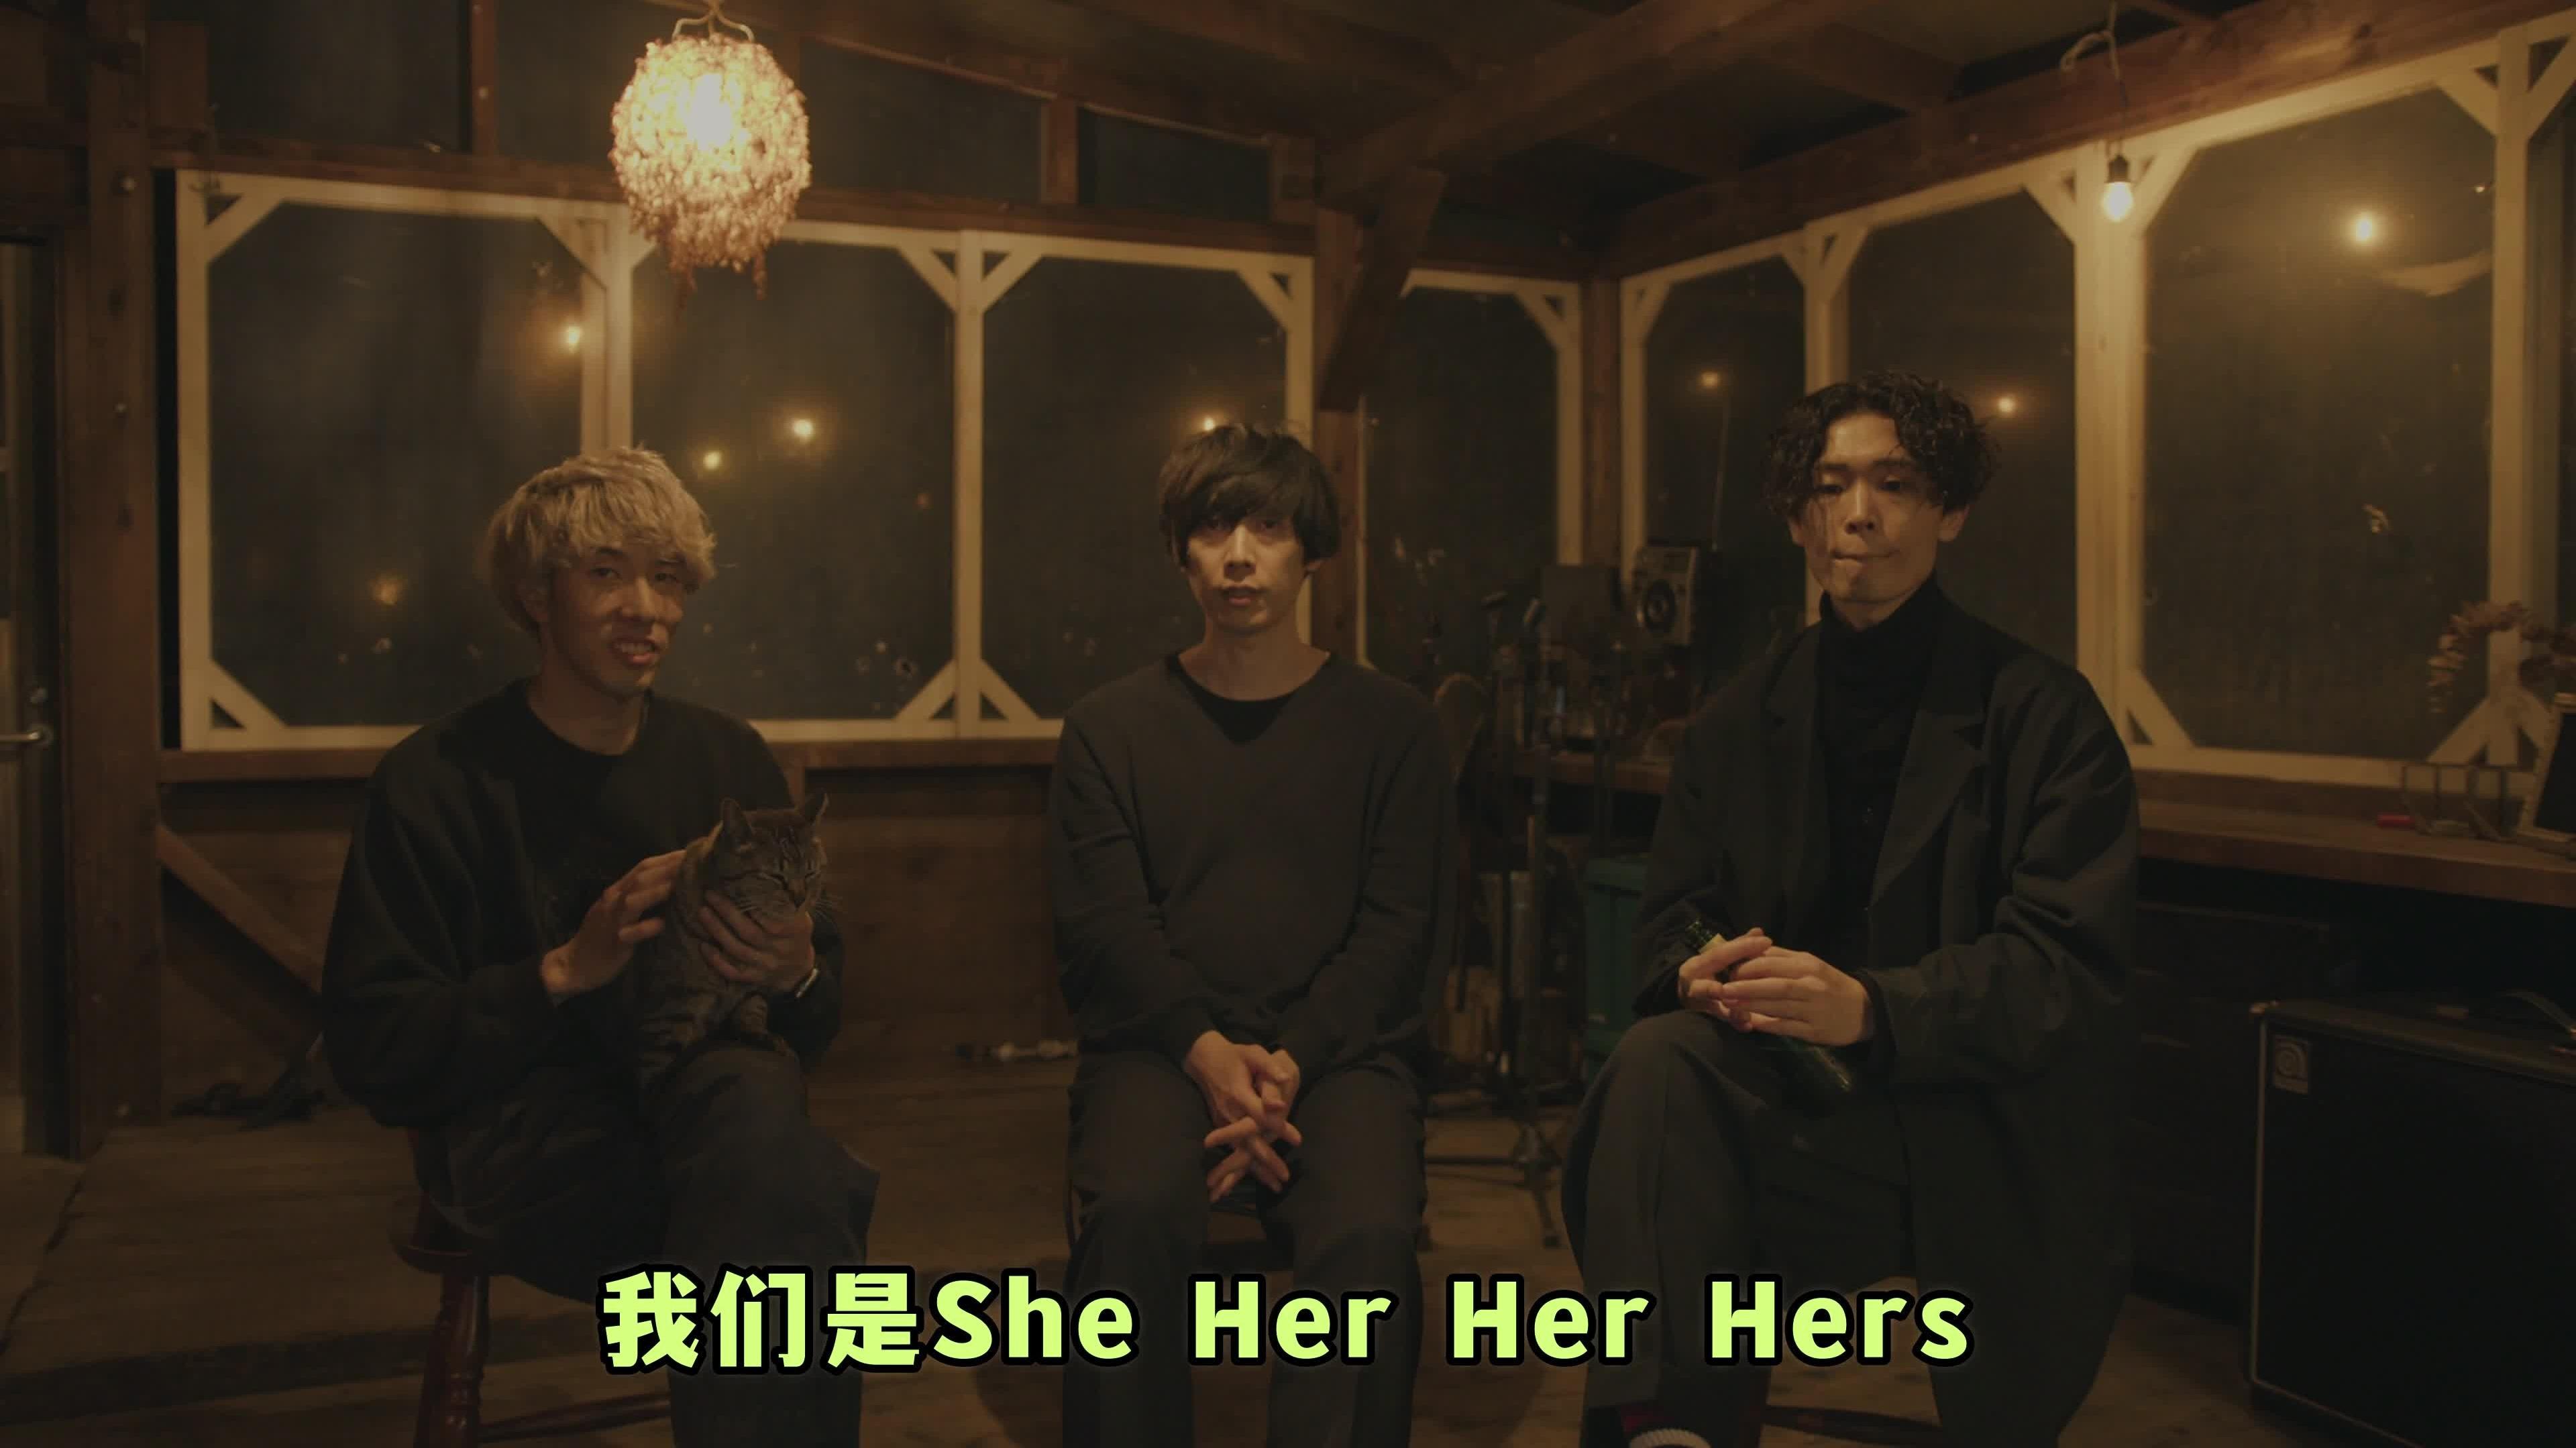 She Her Her Hers - She Her Her Hers 线上演唱会的问候视频